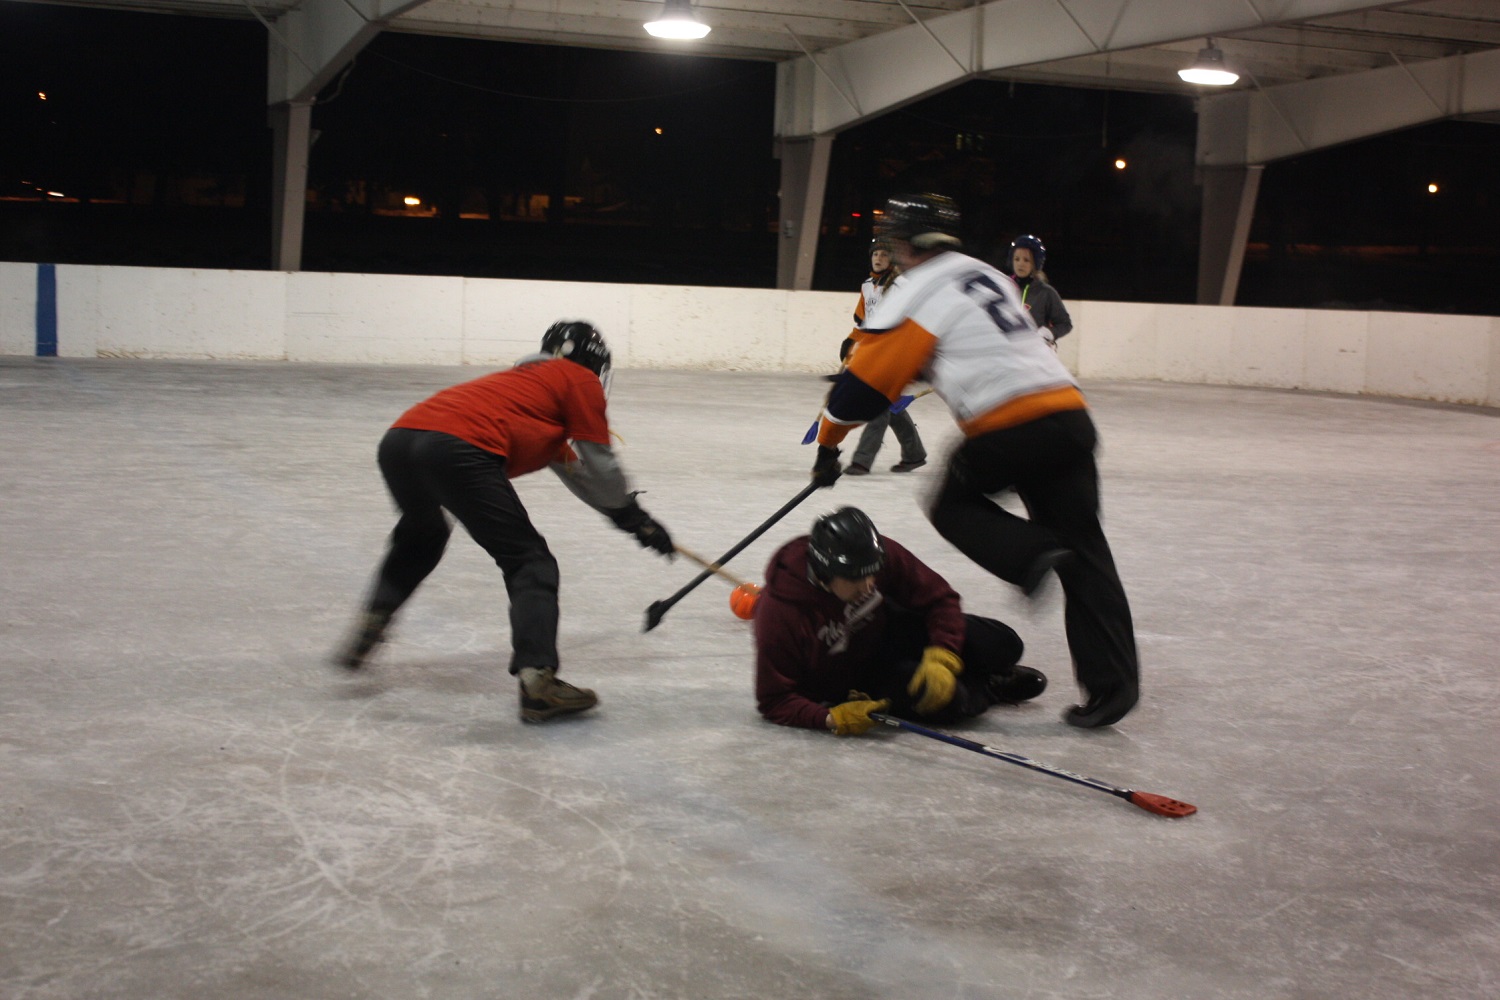 La Crosse broomball teams sponsored by Animal House and John's Bar play each other at the Copeland Park Oktoberfest Shelter in 2013. (Maureen McCollum/WPR)